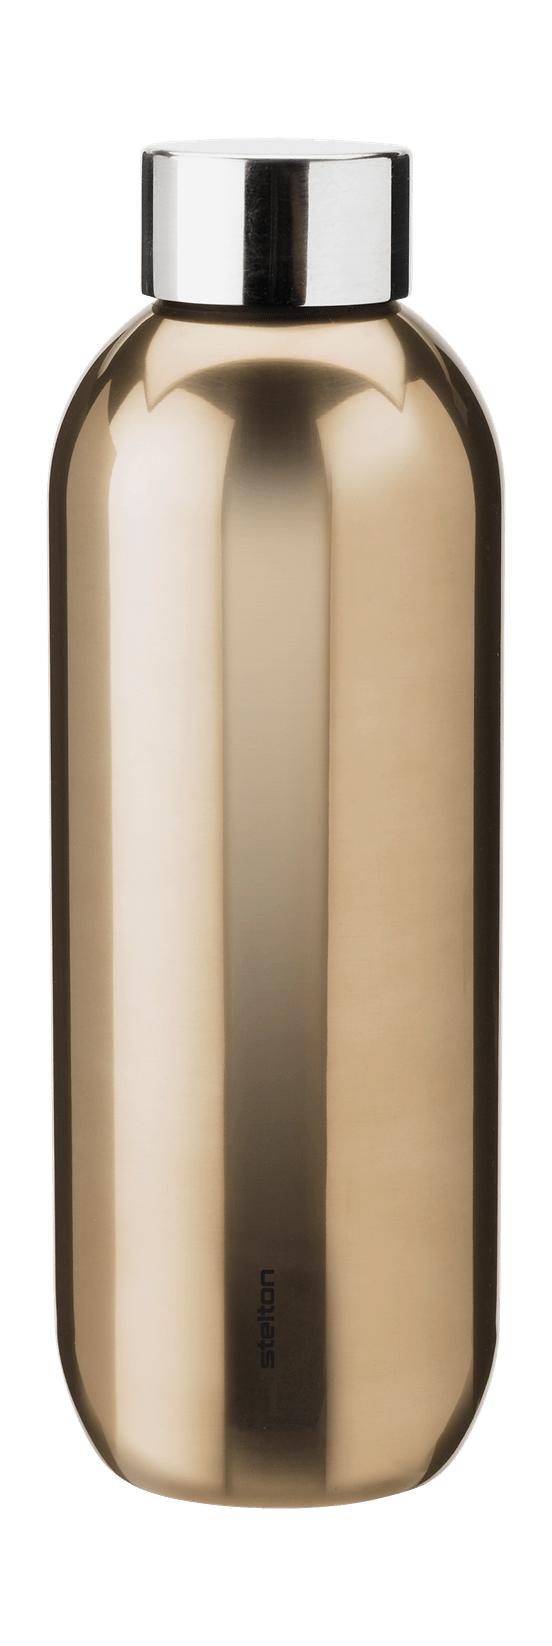 Stelton Keep Cool Thermosflasche 0,6 L, Dunkelgold